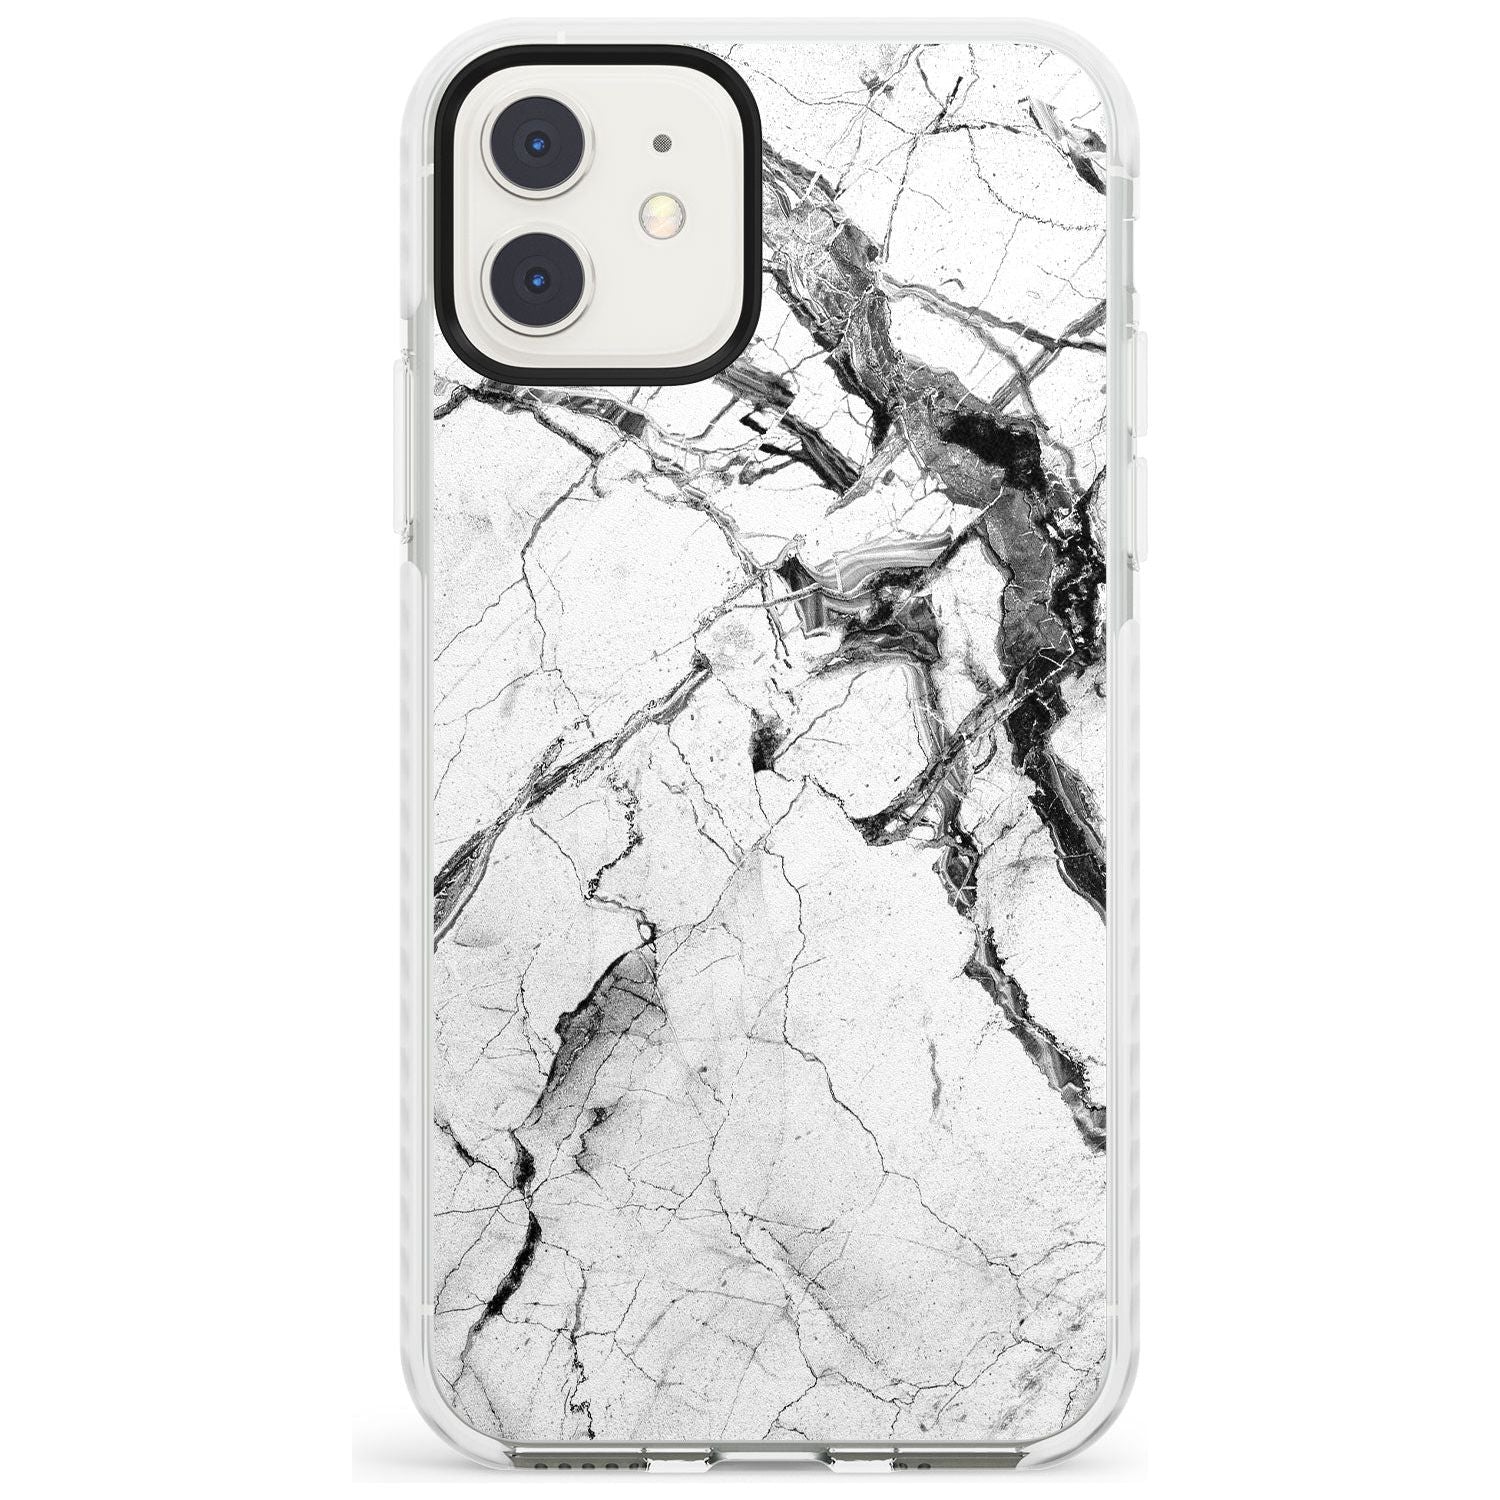 Black & White Stormy Marble Impact Phone Case for iPhone 11